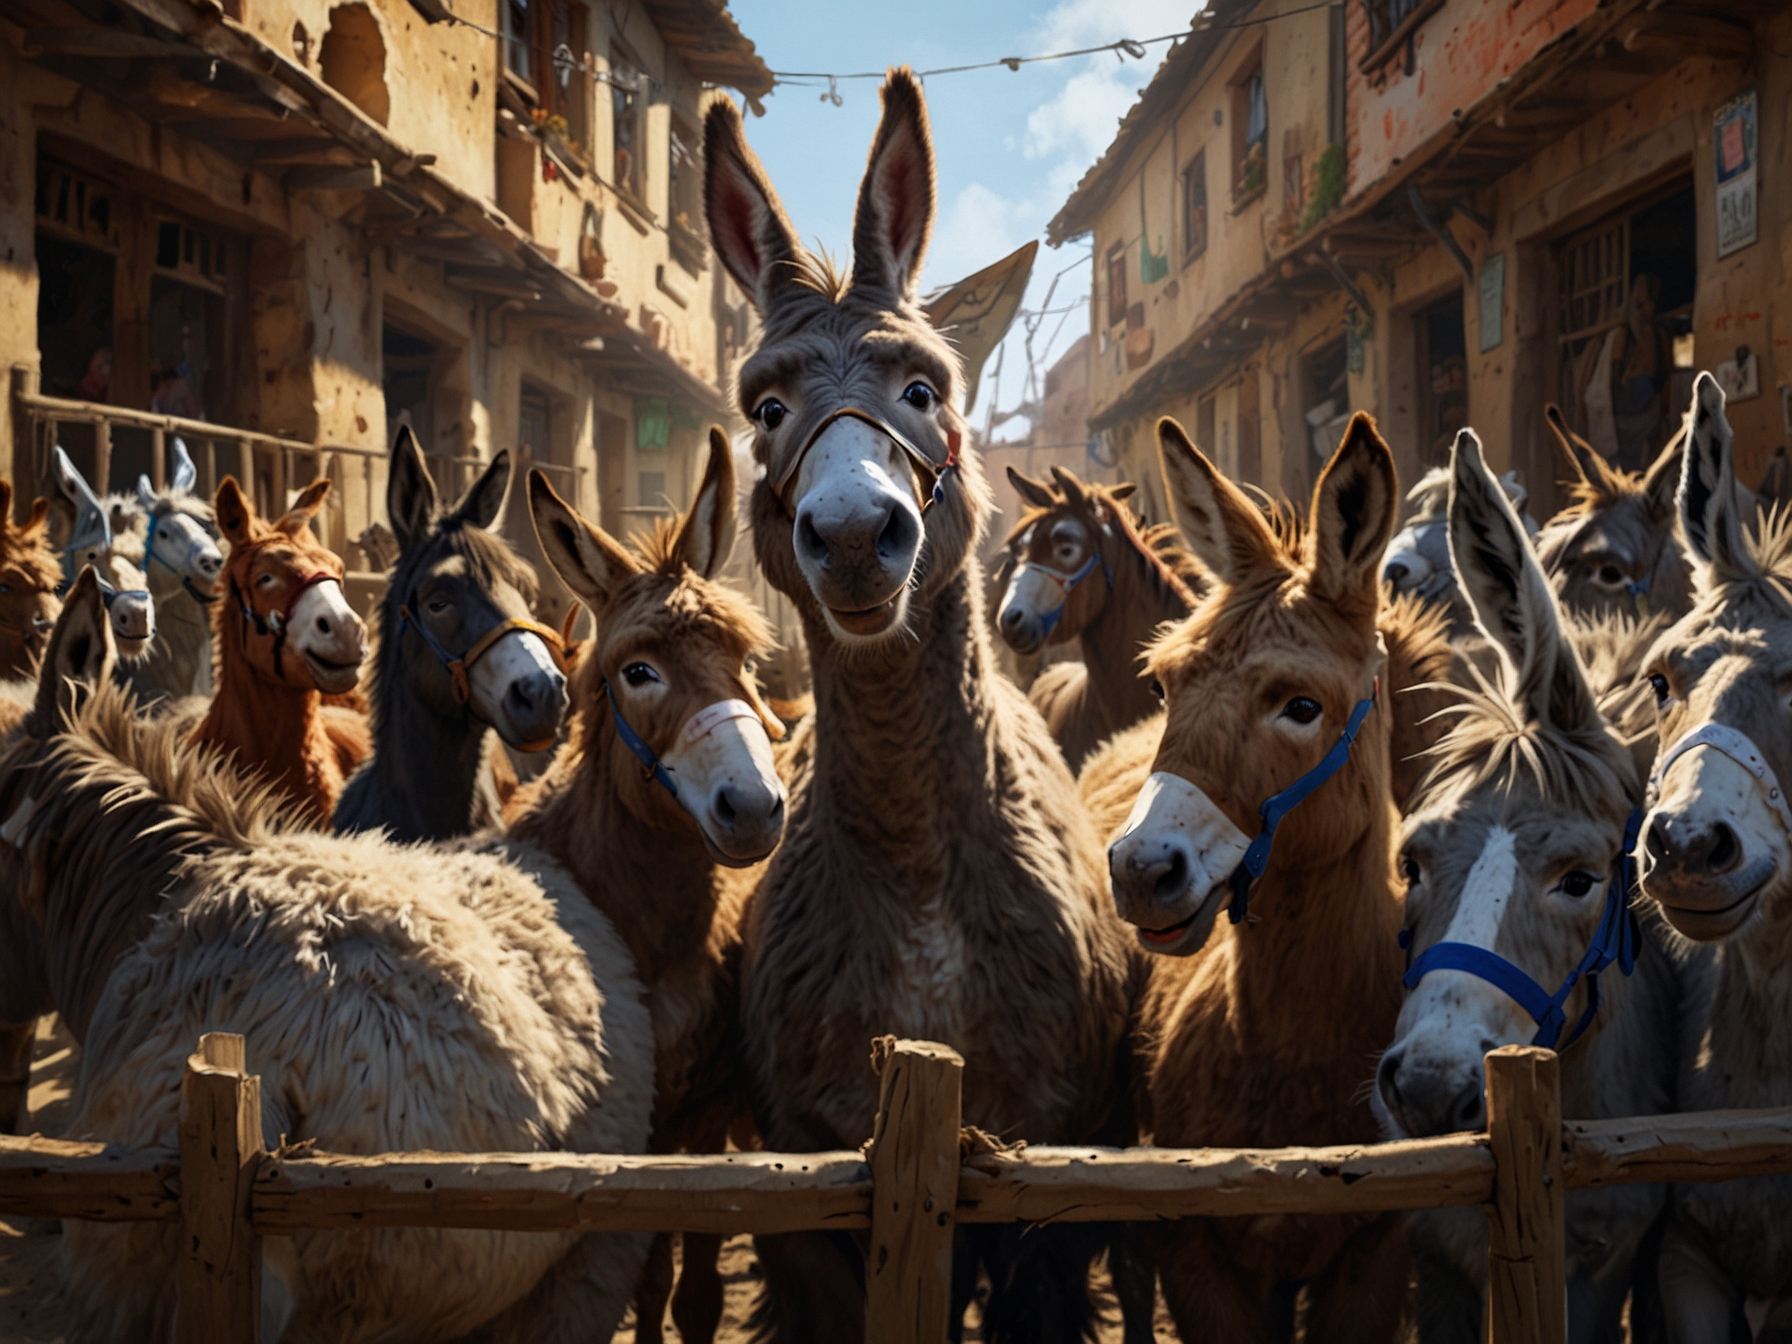 Fans globally unite for a crowdfunding campaign to support the real-world donkey from 'Shrek,' raising significant funds for his medical expenses at the animal sanctuary.